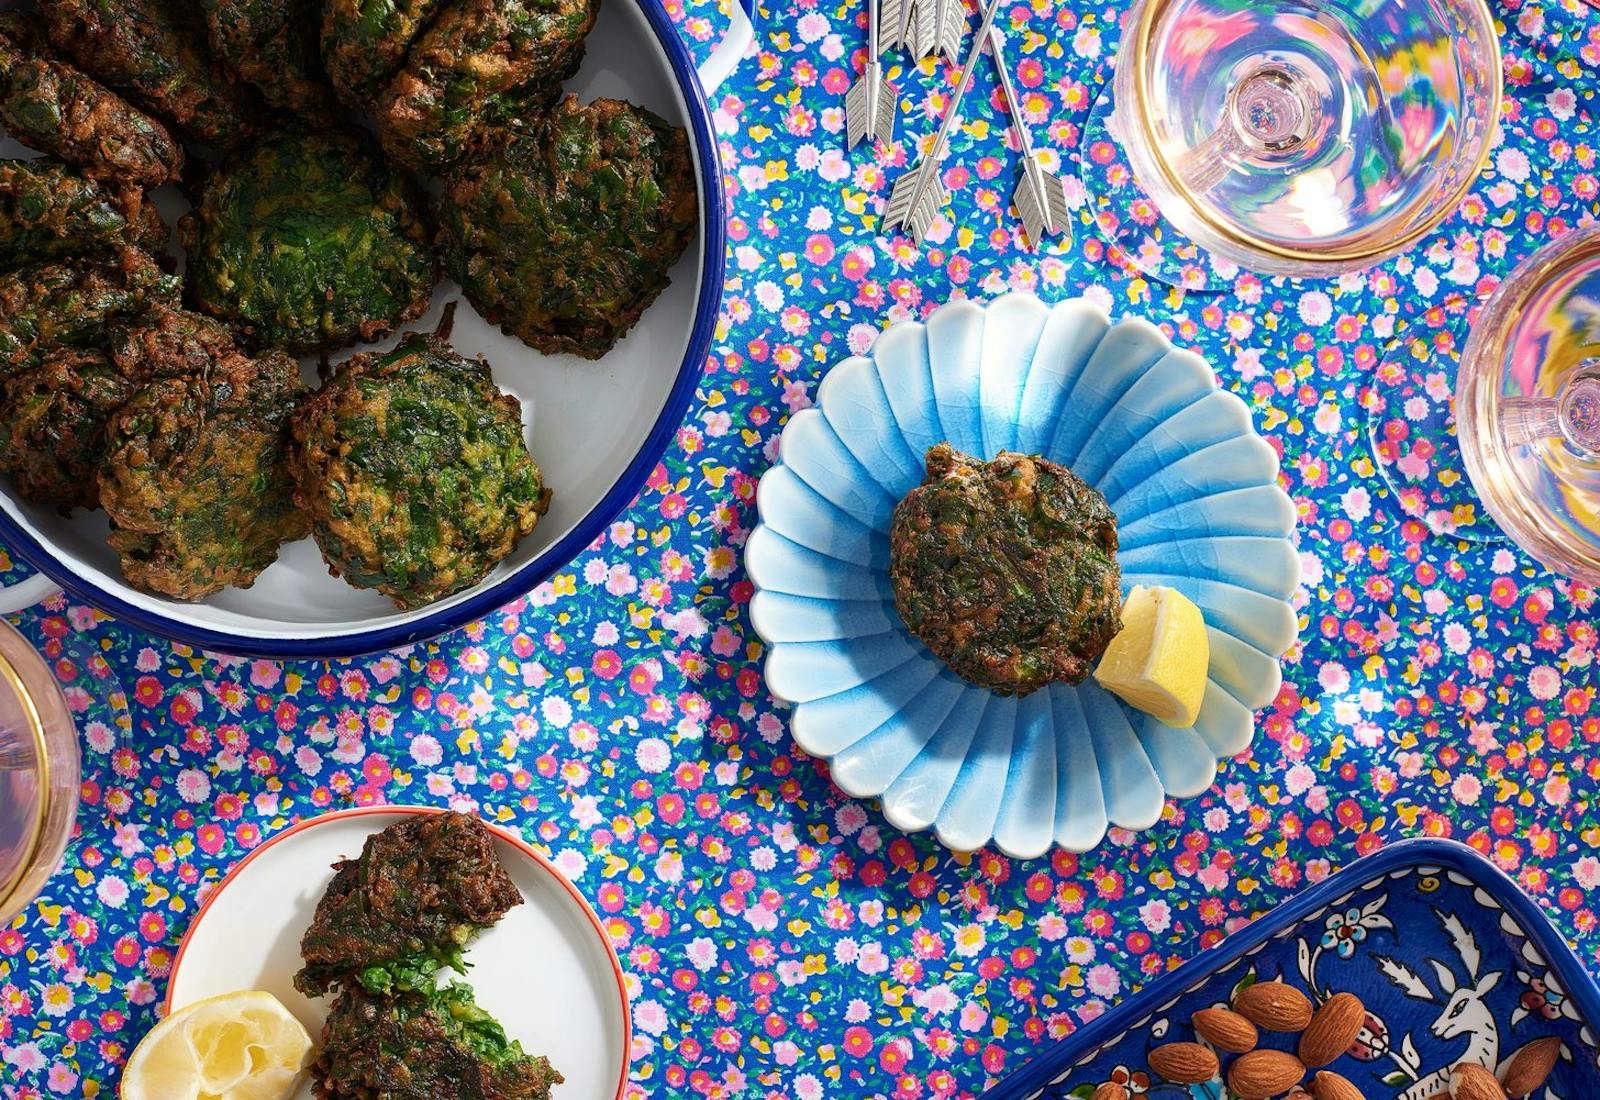 Servings of spinach rissoles with lemon wedges alongside large dish of rissoles, dish with almonds and glasses of white wine atop blue and pink floral tablecloth.